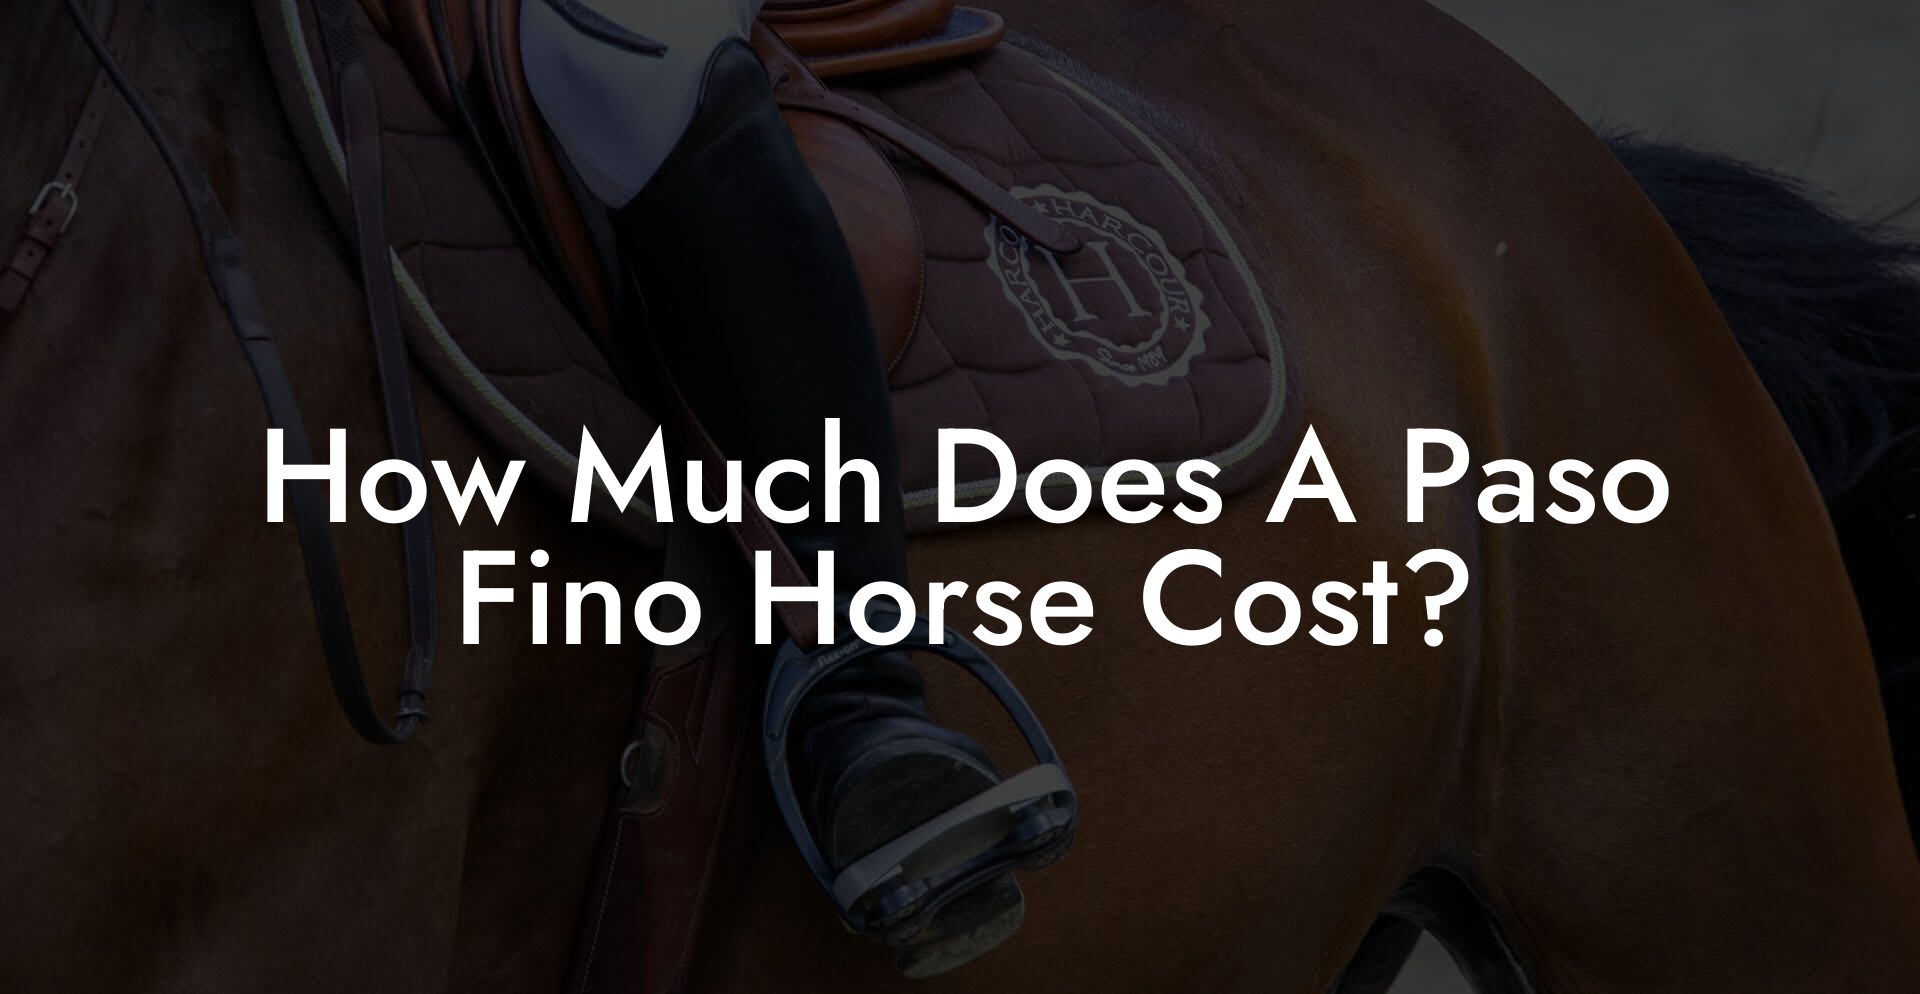 How Much Does A Paso Fino Horse Cost